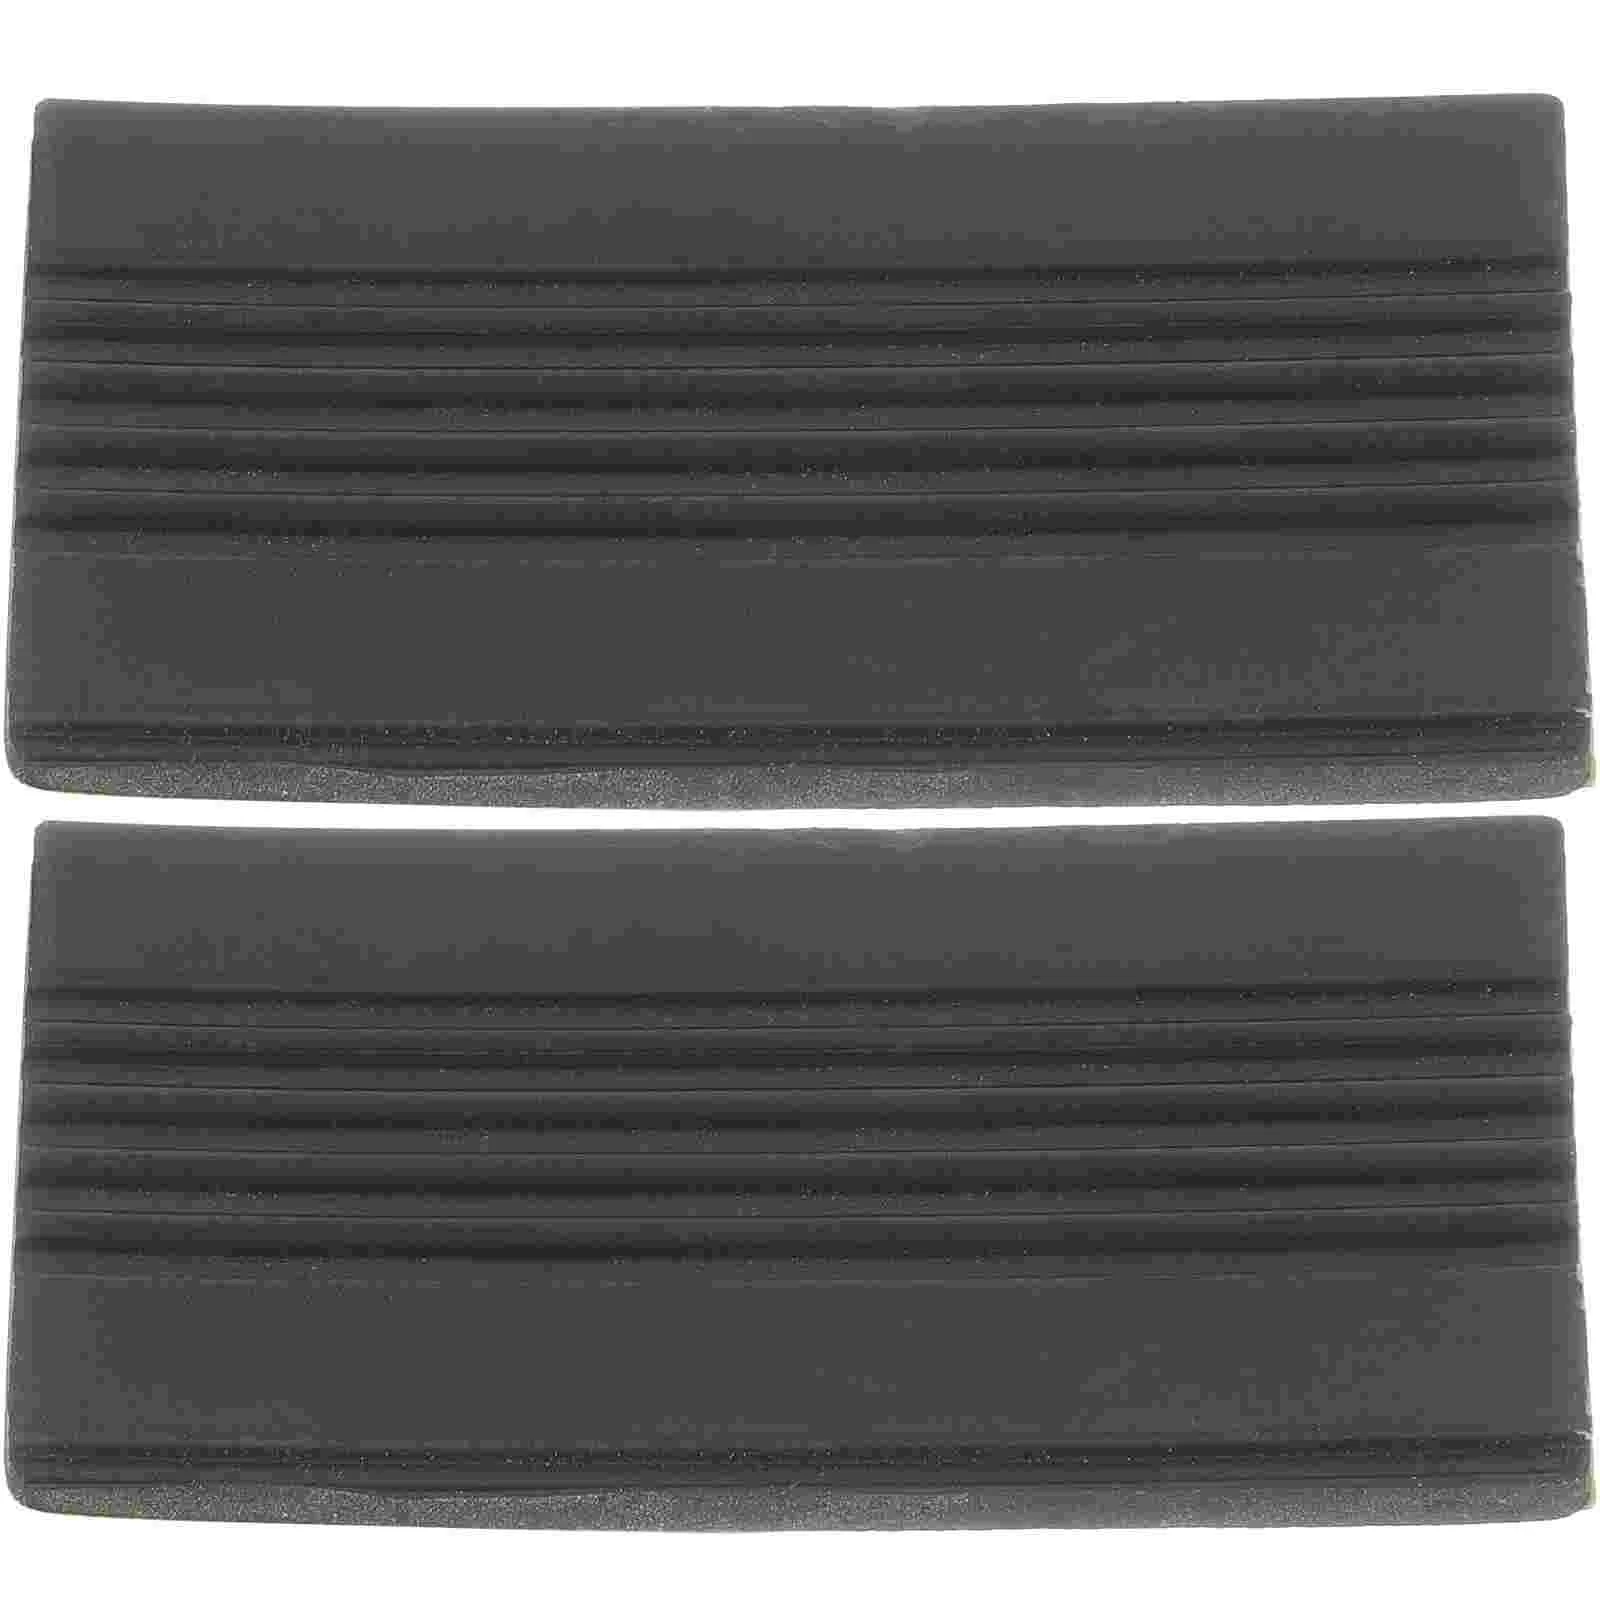 

2 Pcs Instrument Drum Pedal Accessories Antiskid Tape Universal Guards For Bass Beater Mat Percussion Part Rubber